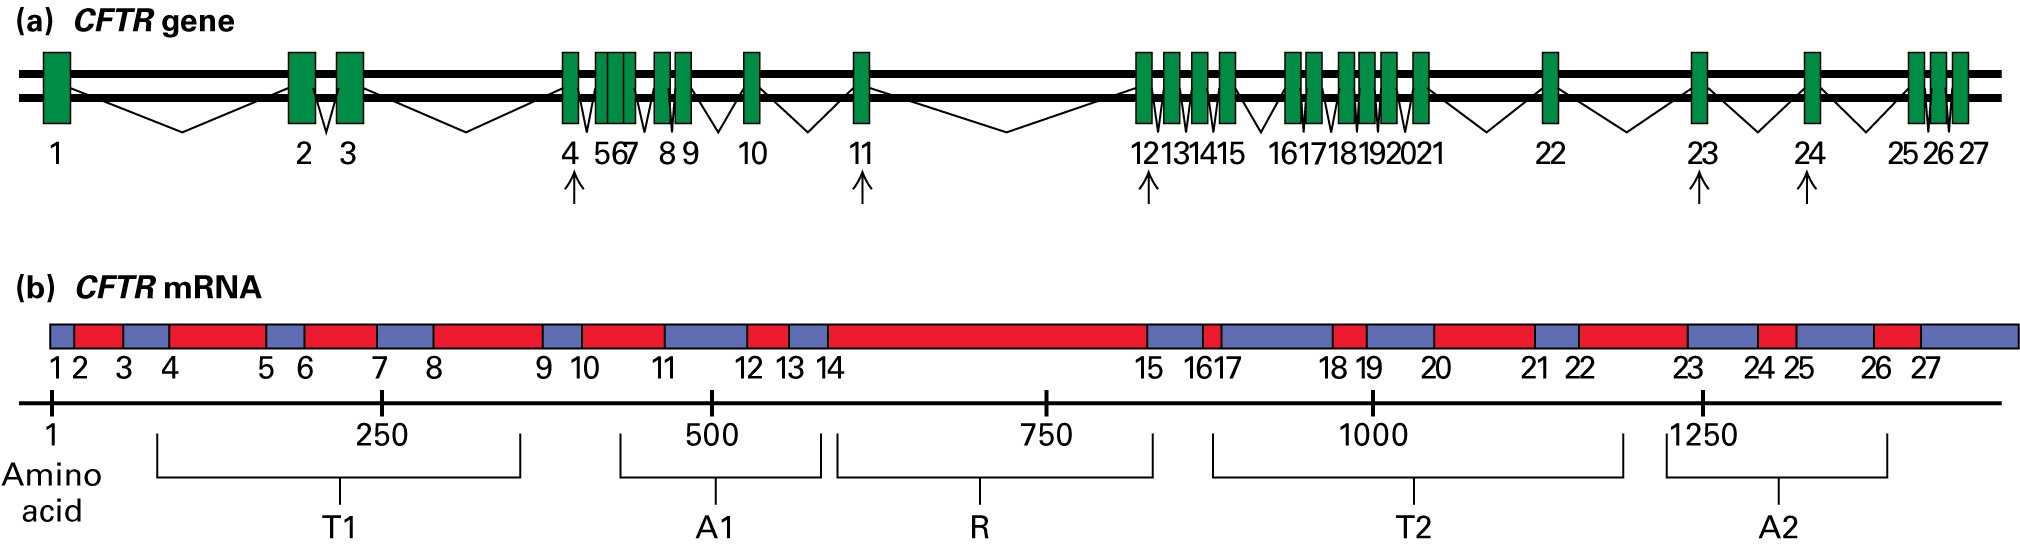 (a) The CFTR gene comprises 27 exons. Arrows point to exons 4, 11, 12, 23, and 24. (b) The CFTR mRNA encodes 1480 amino acids. The T1 domain is encoded in exons 3 to 8. The A1 domain is encoded in exons 10 to 13. The R domain is encoded in exons 14 and 15. The T2 domain is encoded in exons 16 to 22. The A2 domain is encoded in exons 22 to 26. 